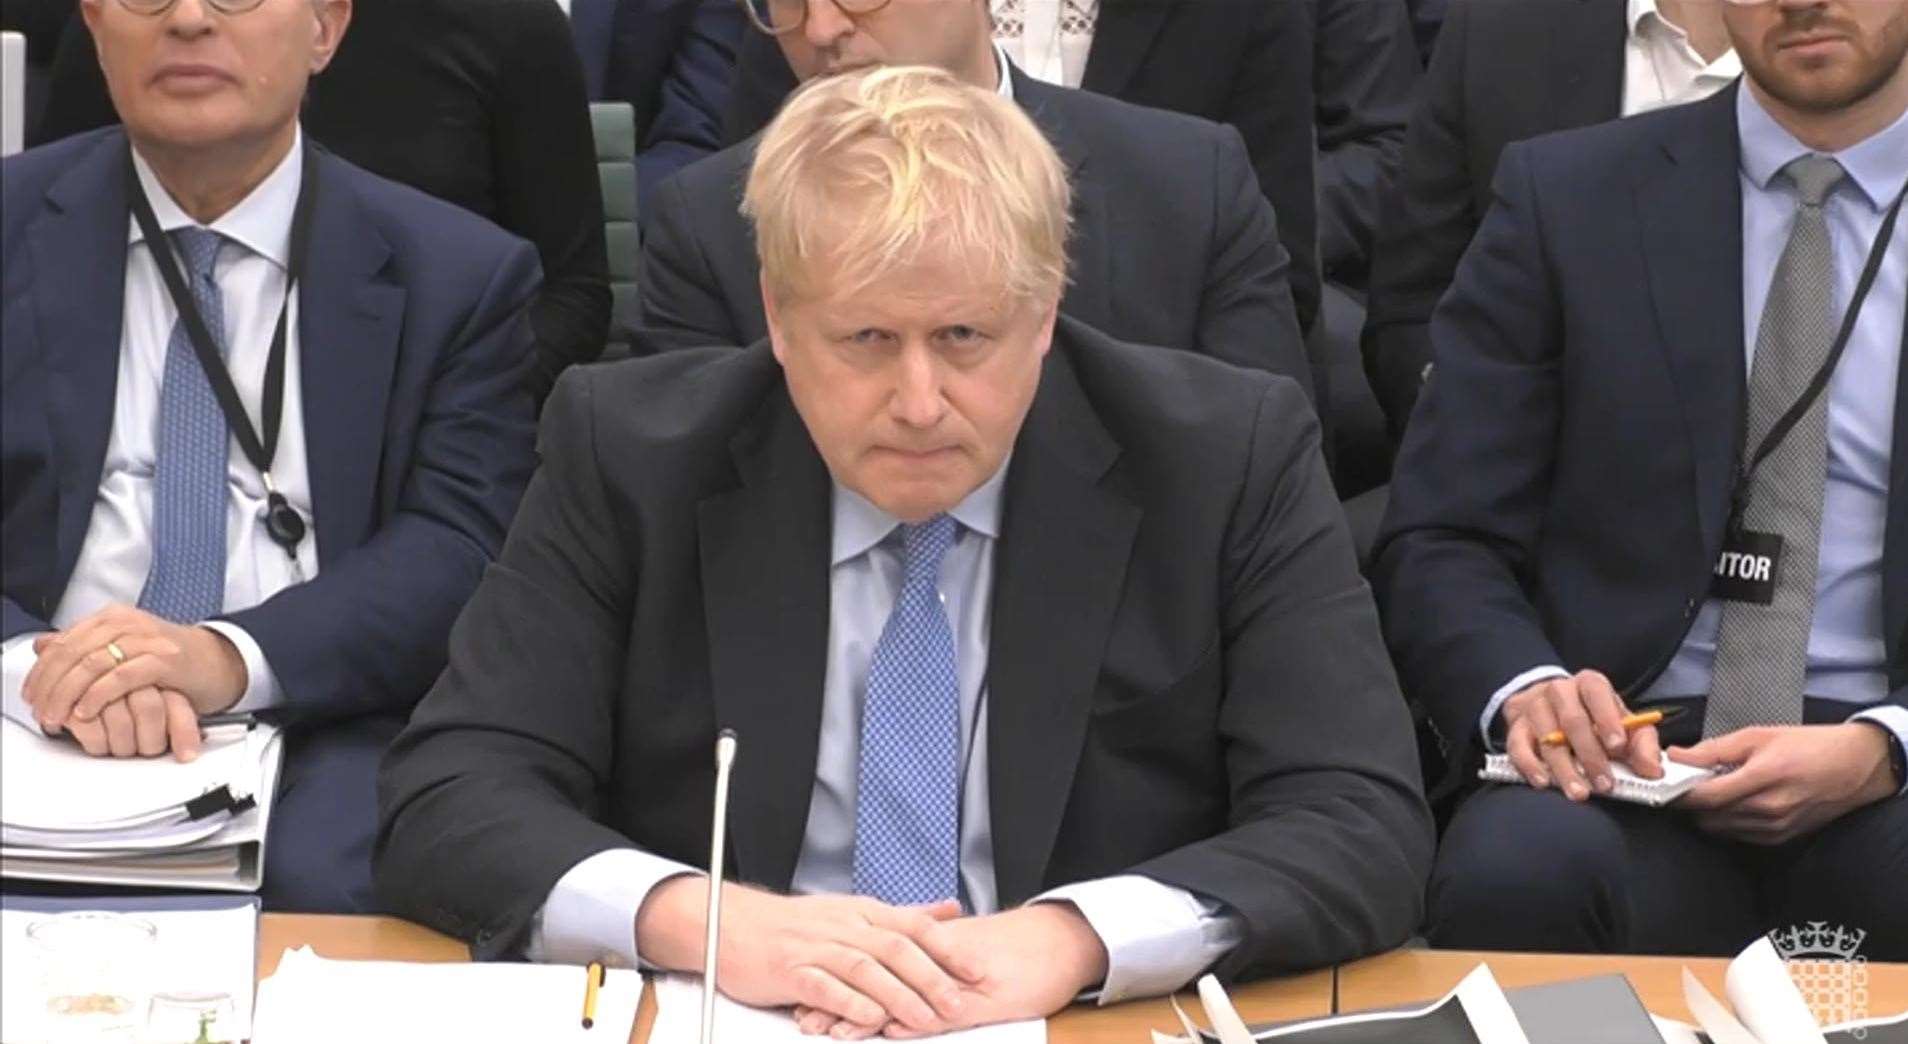 Boris Johnson giving evidence to the Privileges Committee at the House of Commons (House of Commons/UK Parliament/PA)